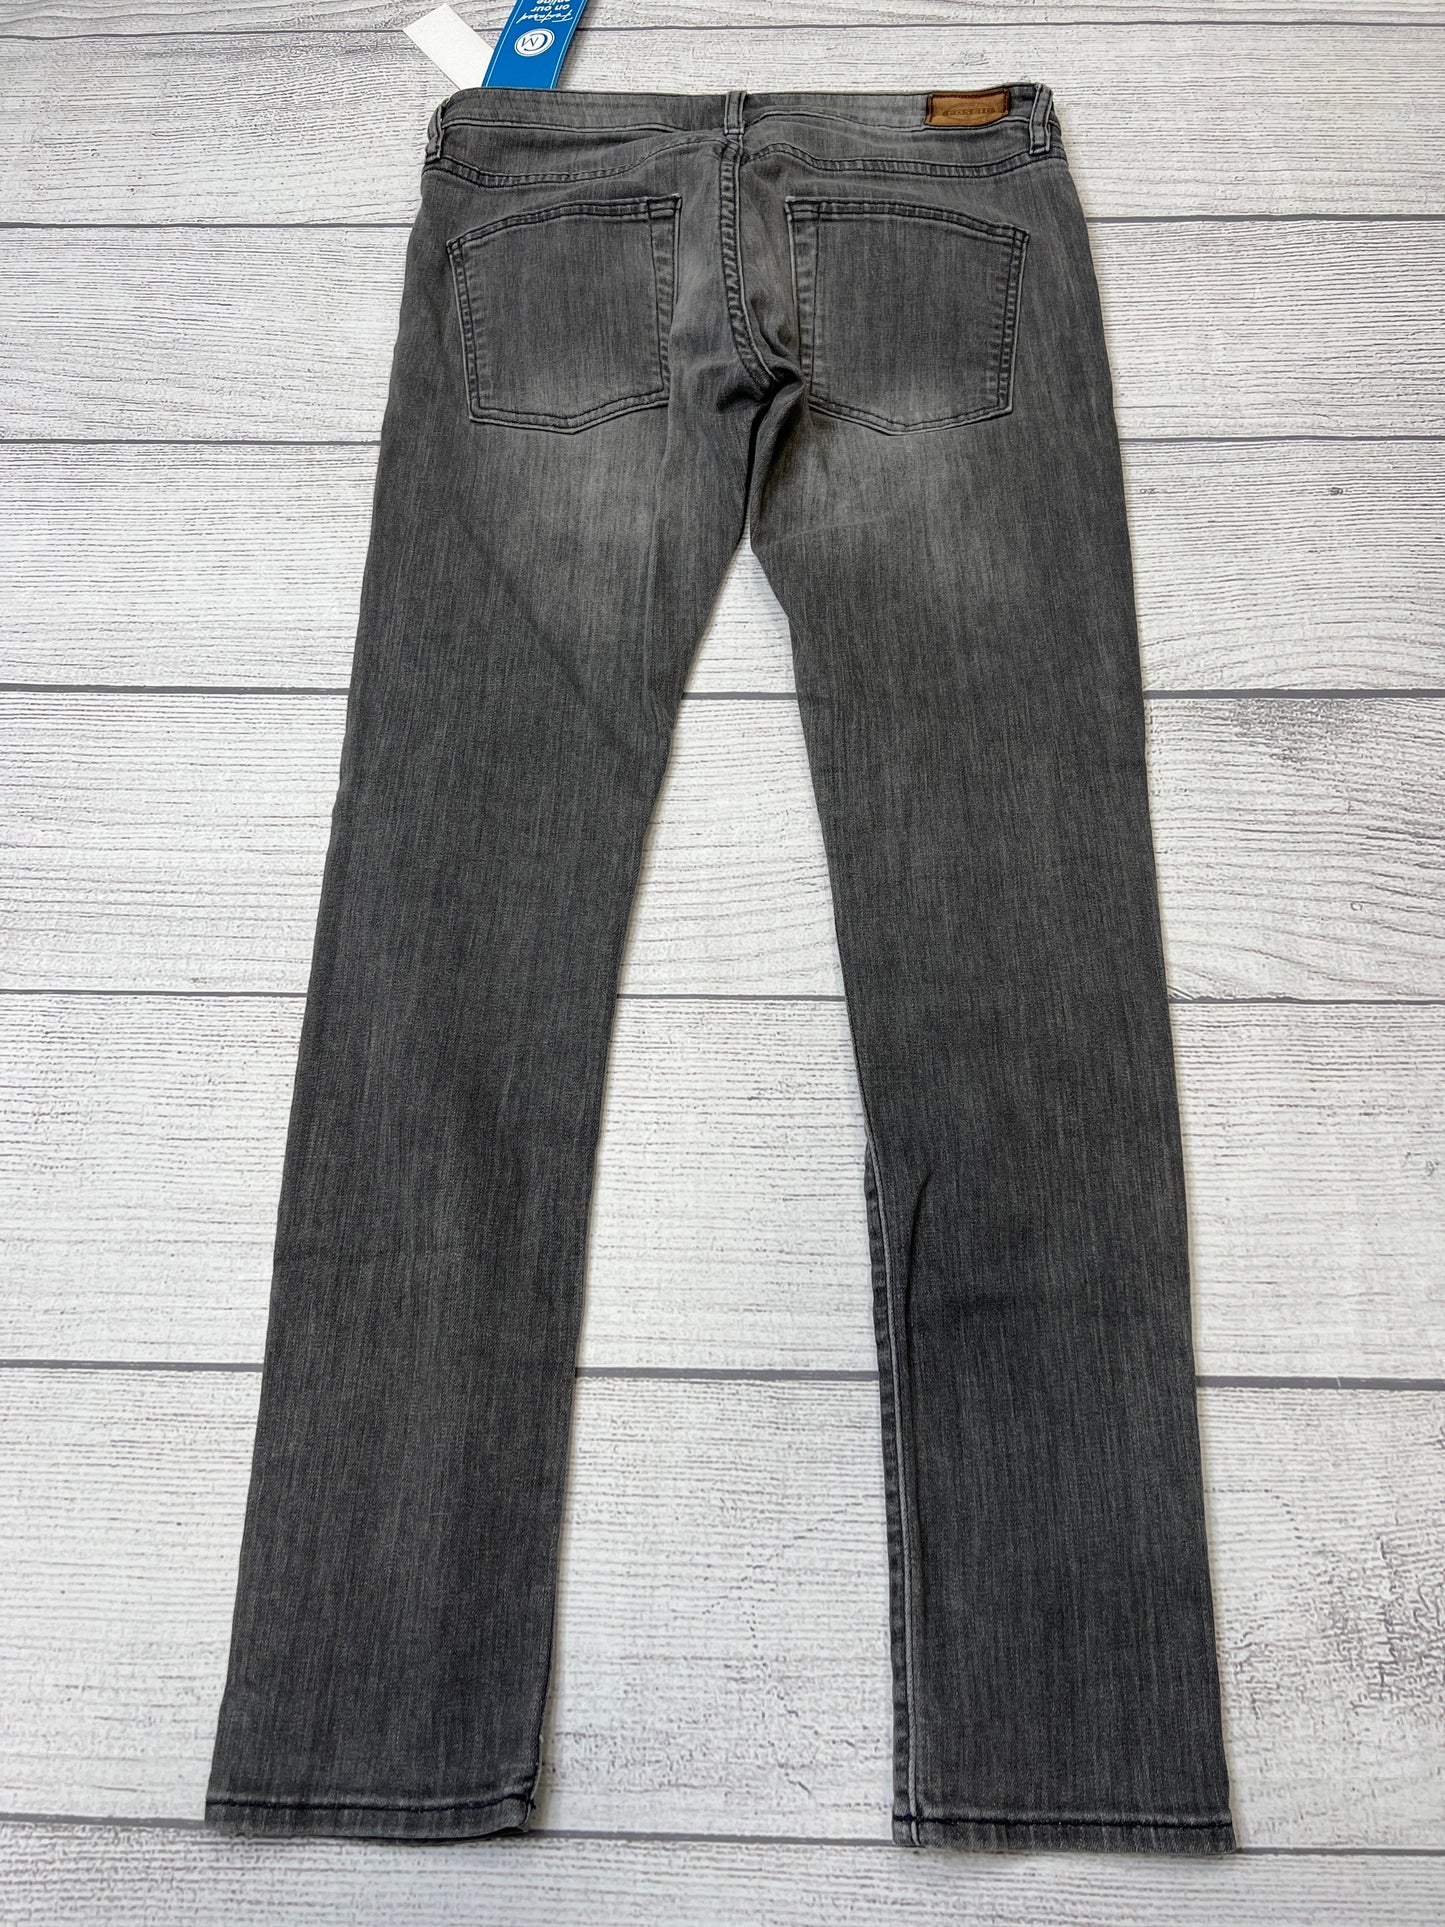 Jeans Designer By Fossil  Size: 4/27